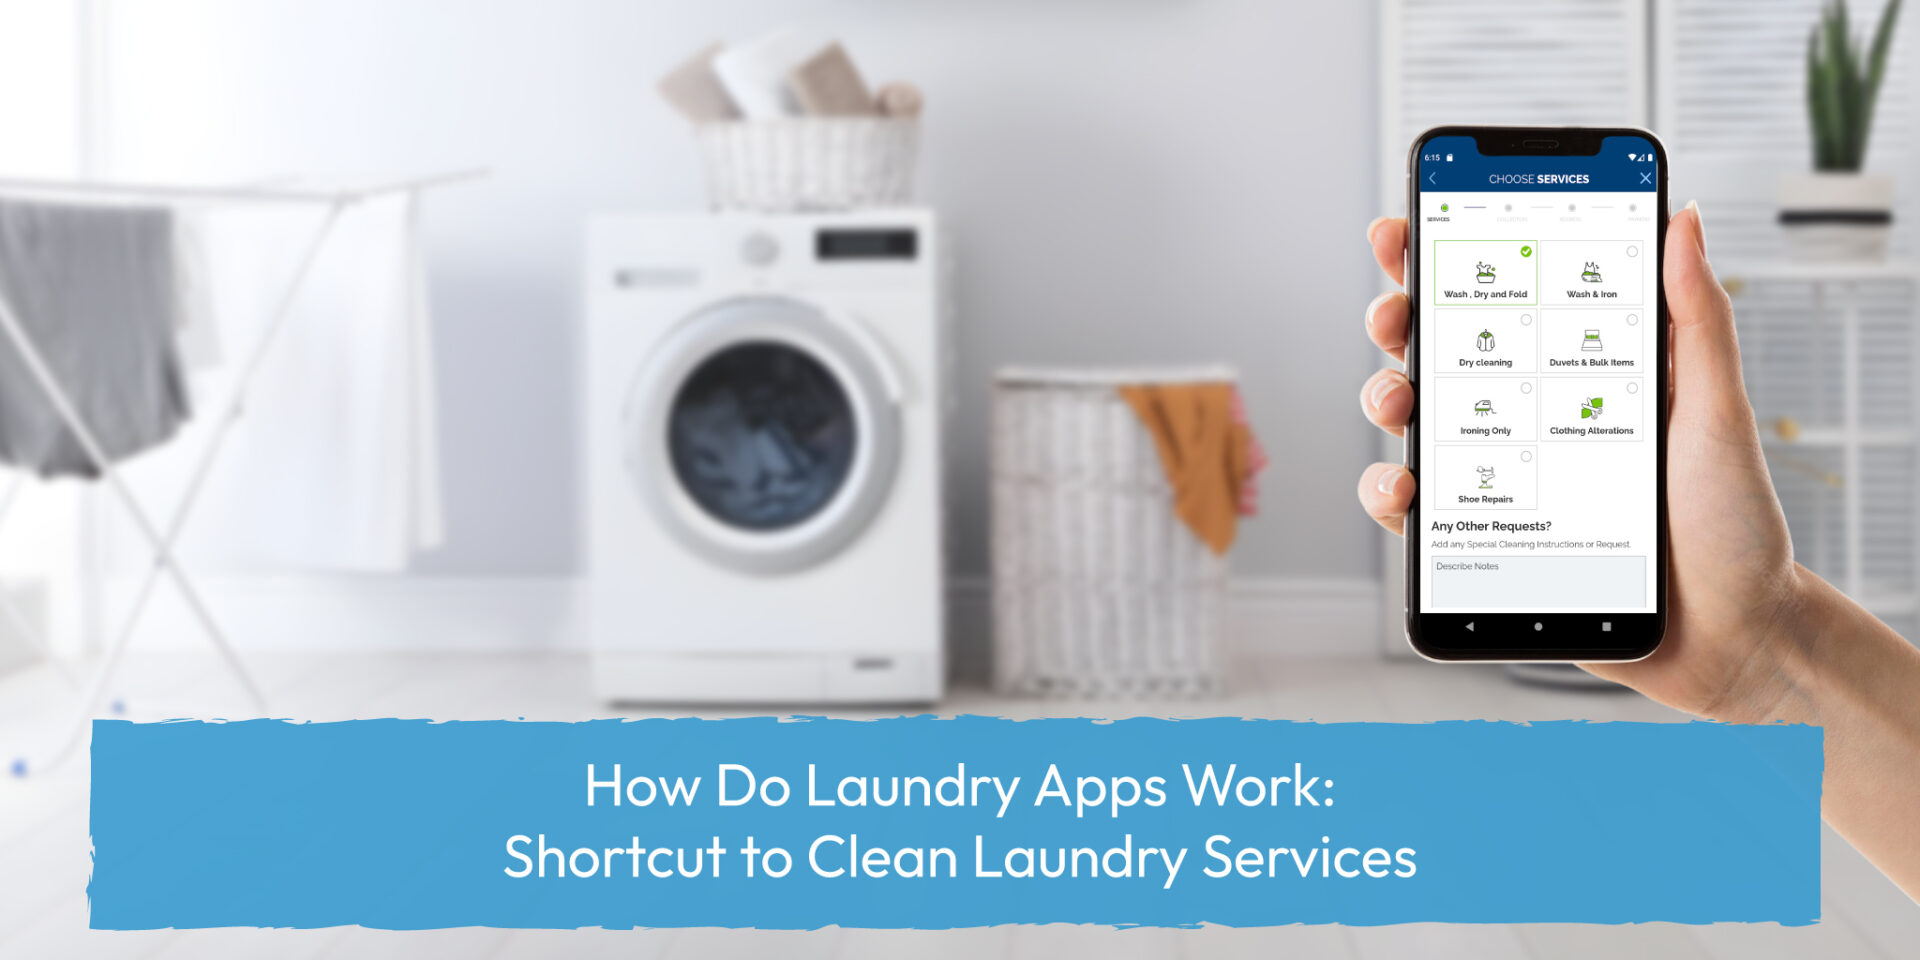 How Do Laundry Apps Work